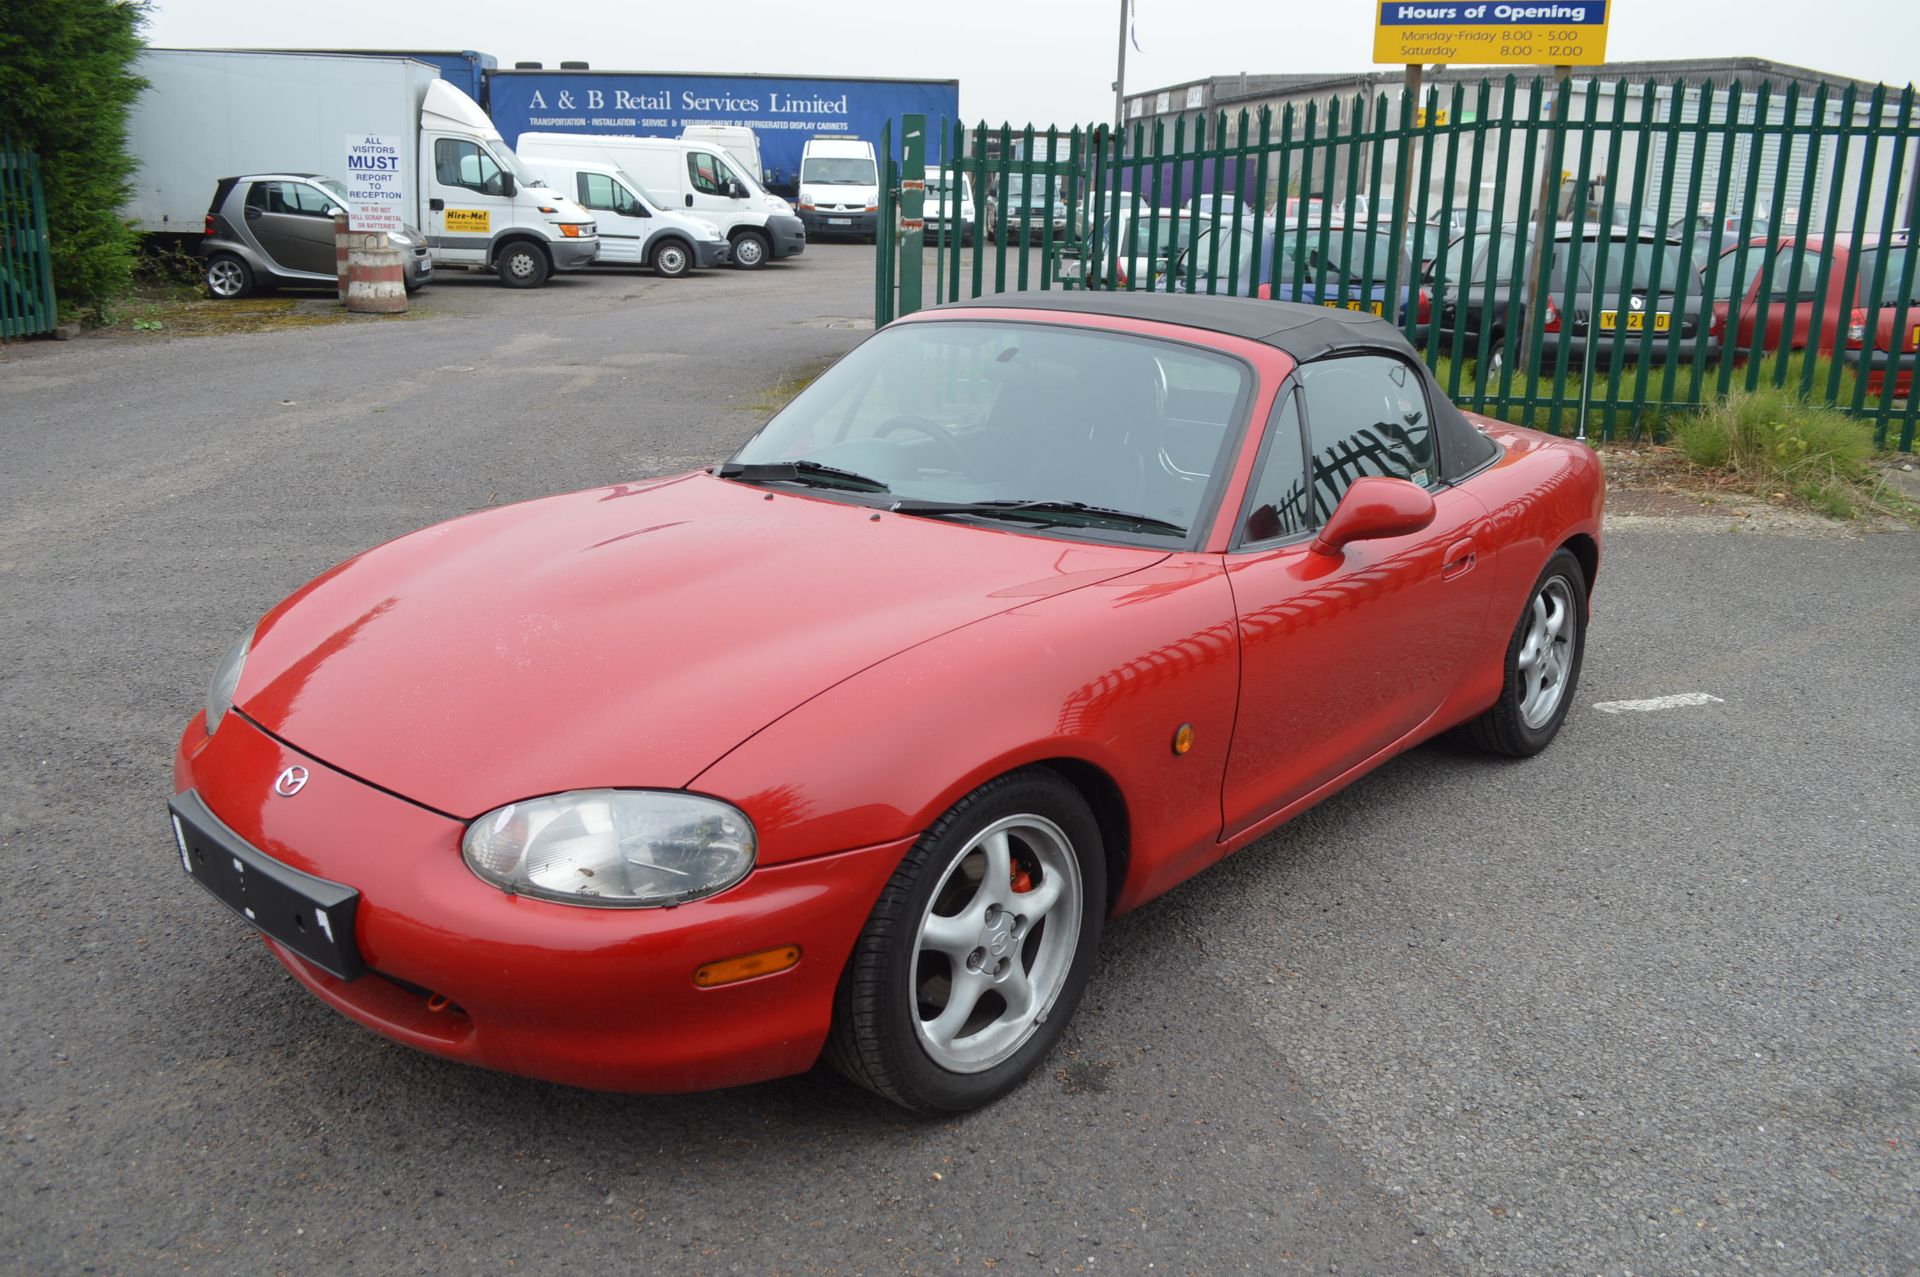 2001/Y REG MAZDA MX-5 1.81 CONVERTIBLE, UPRATED SUSPENSION, BRAKES, INDUCTION ETC - Image 3 of 17